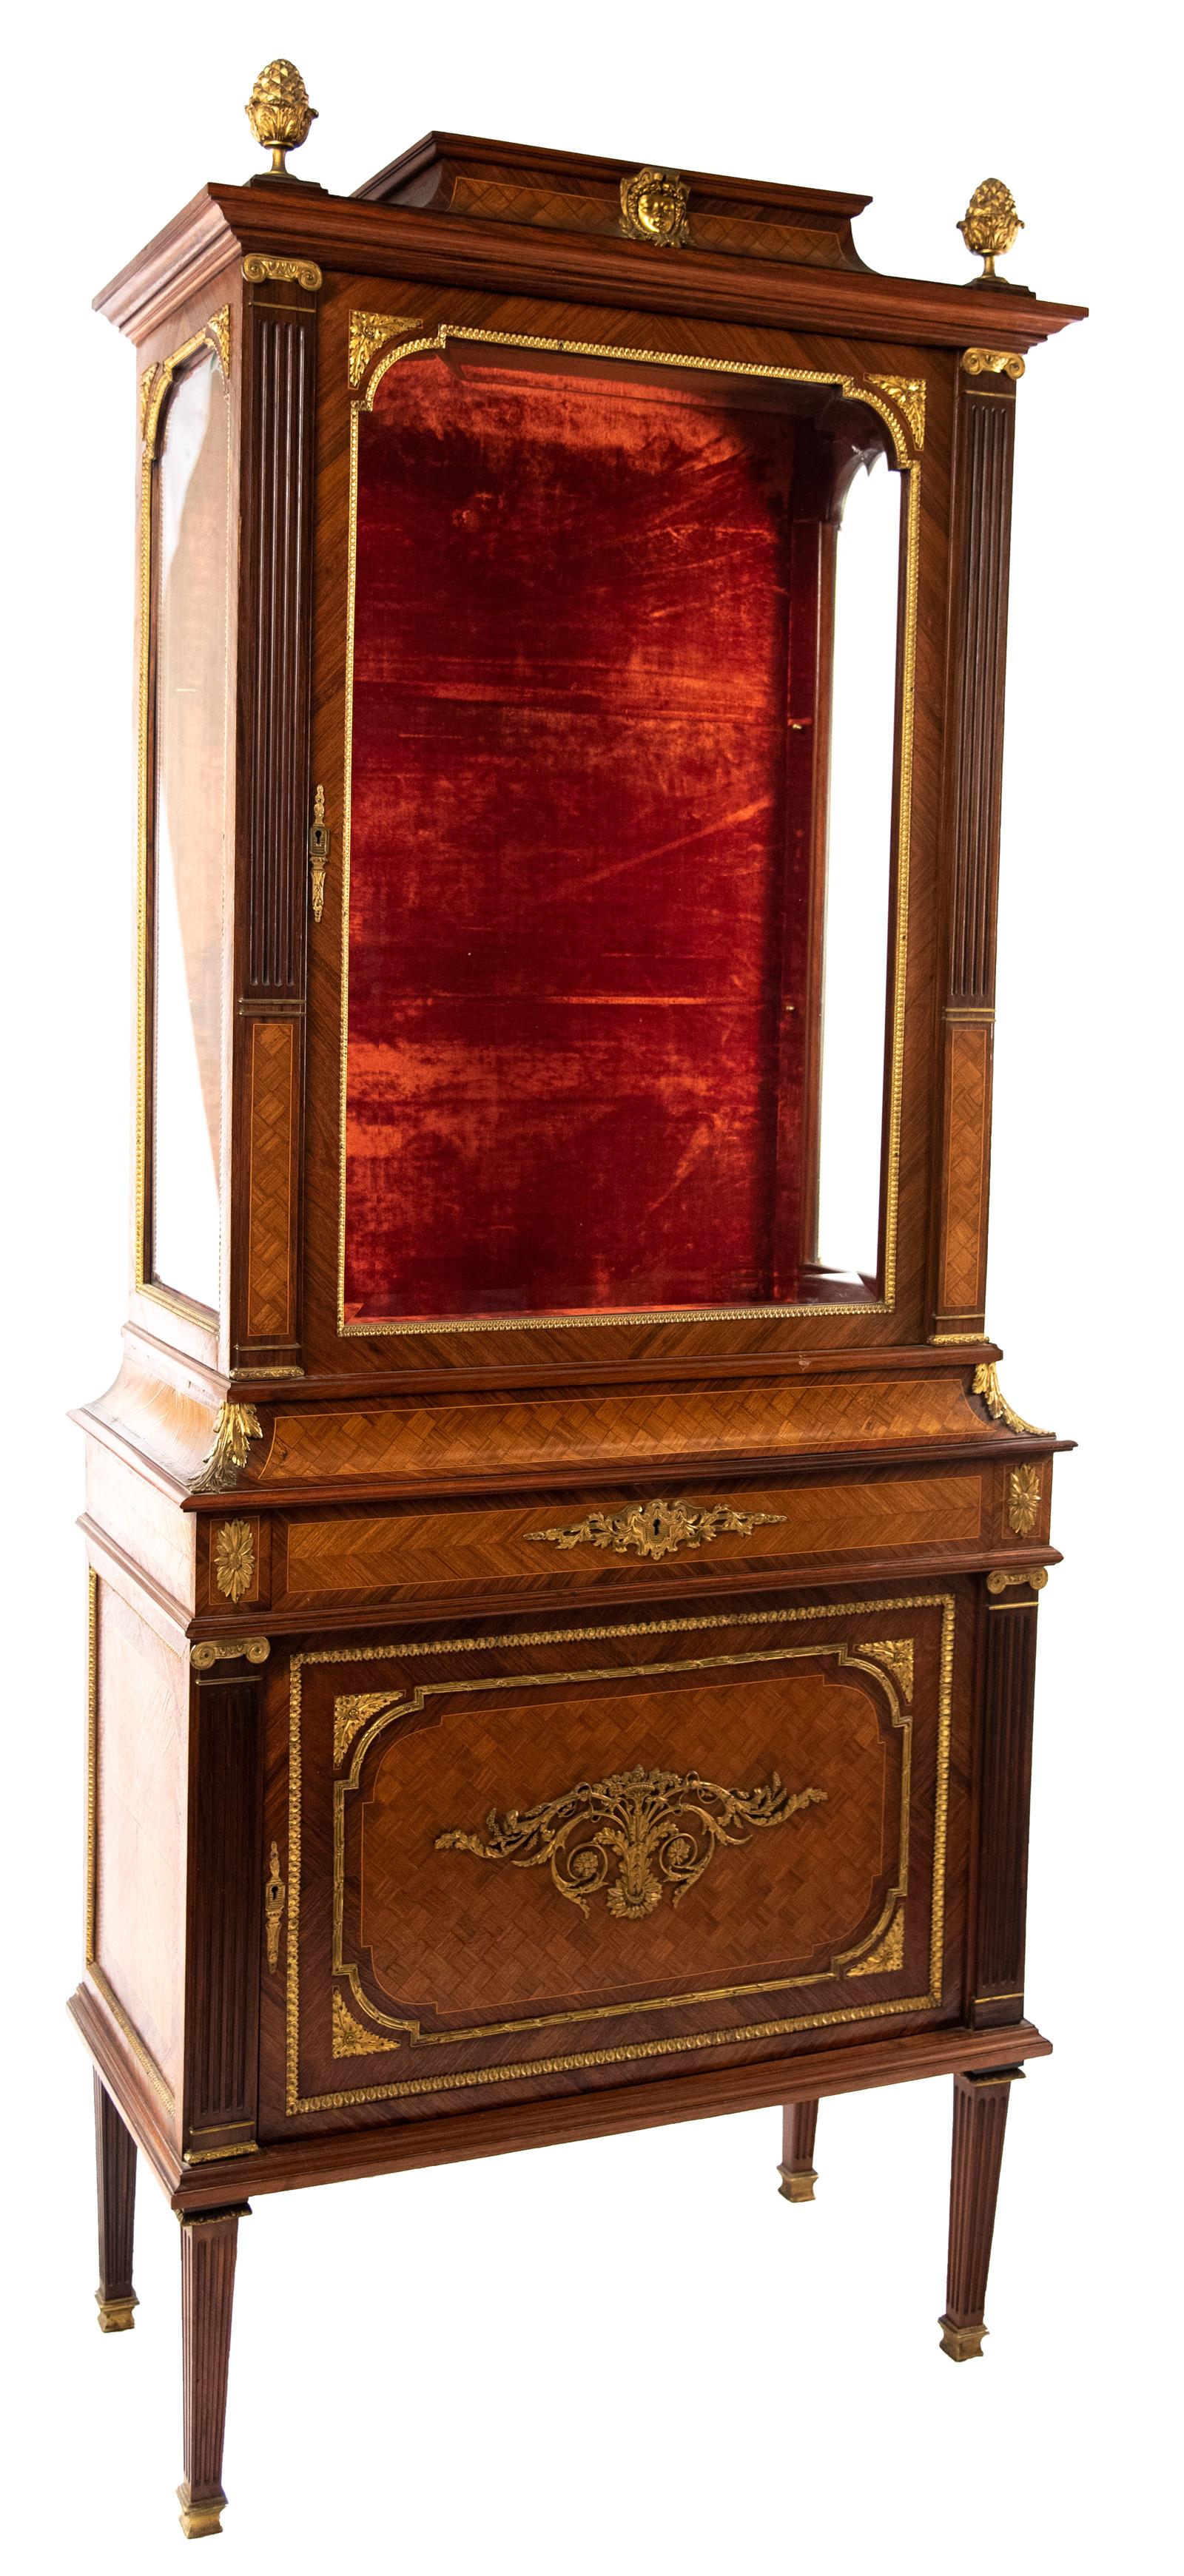 19th century French Louis XVI style vitrine in parqueted wood with ormolu mounts by A. Bastet, Lyon.